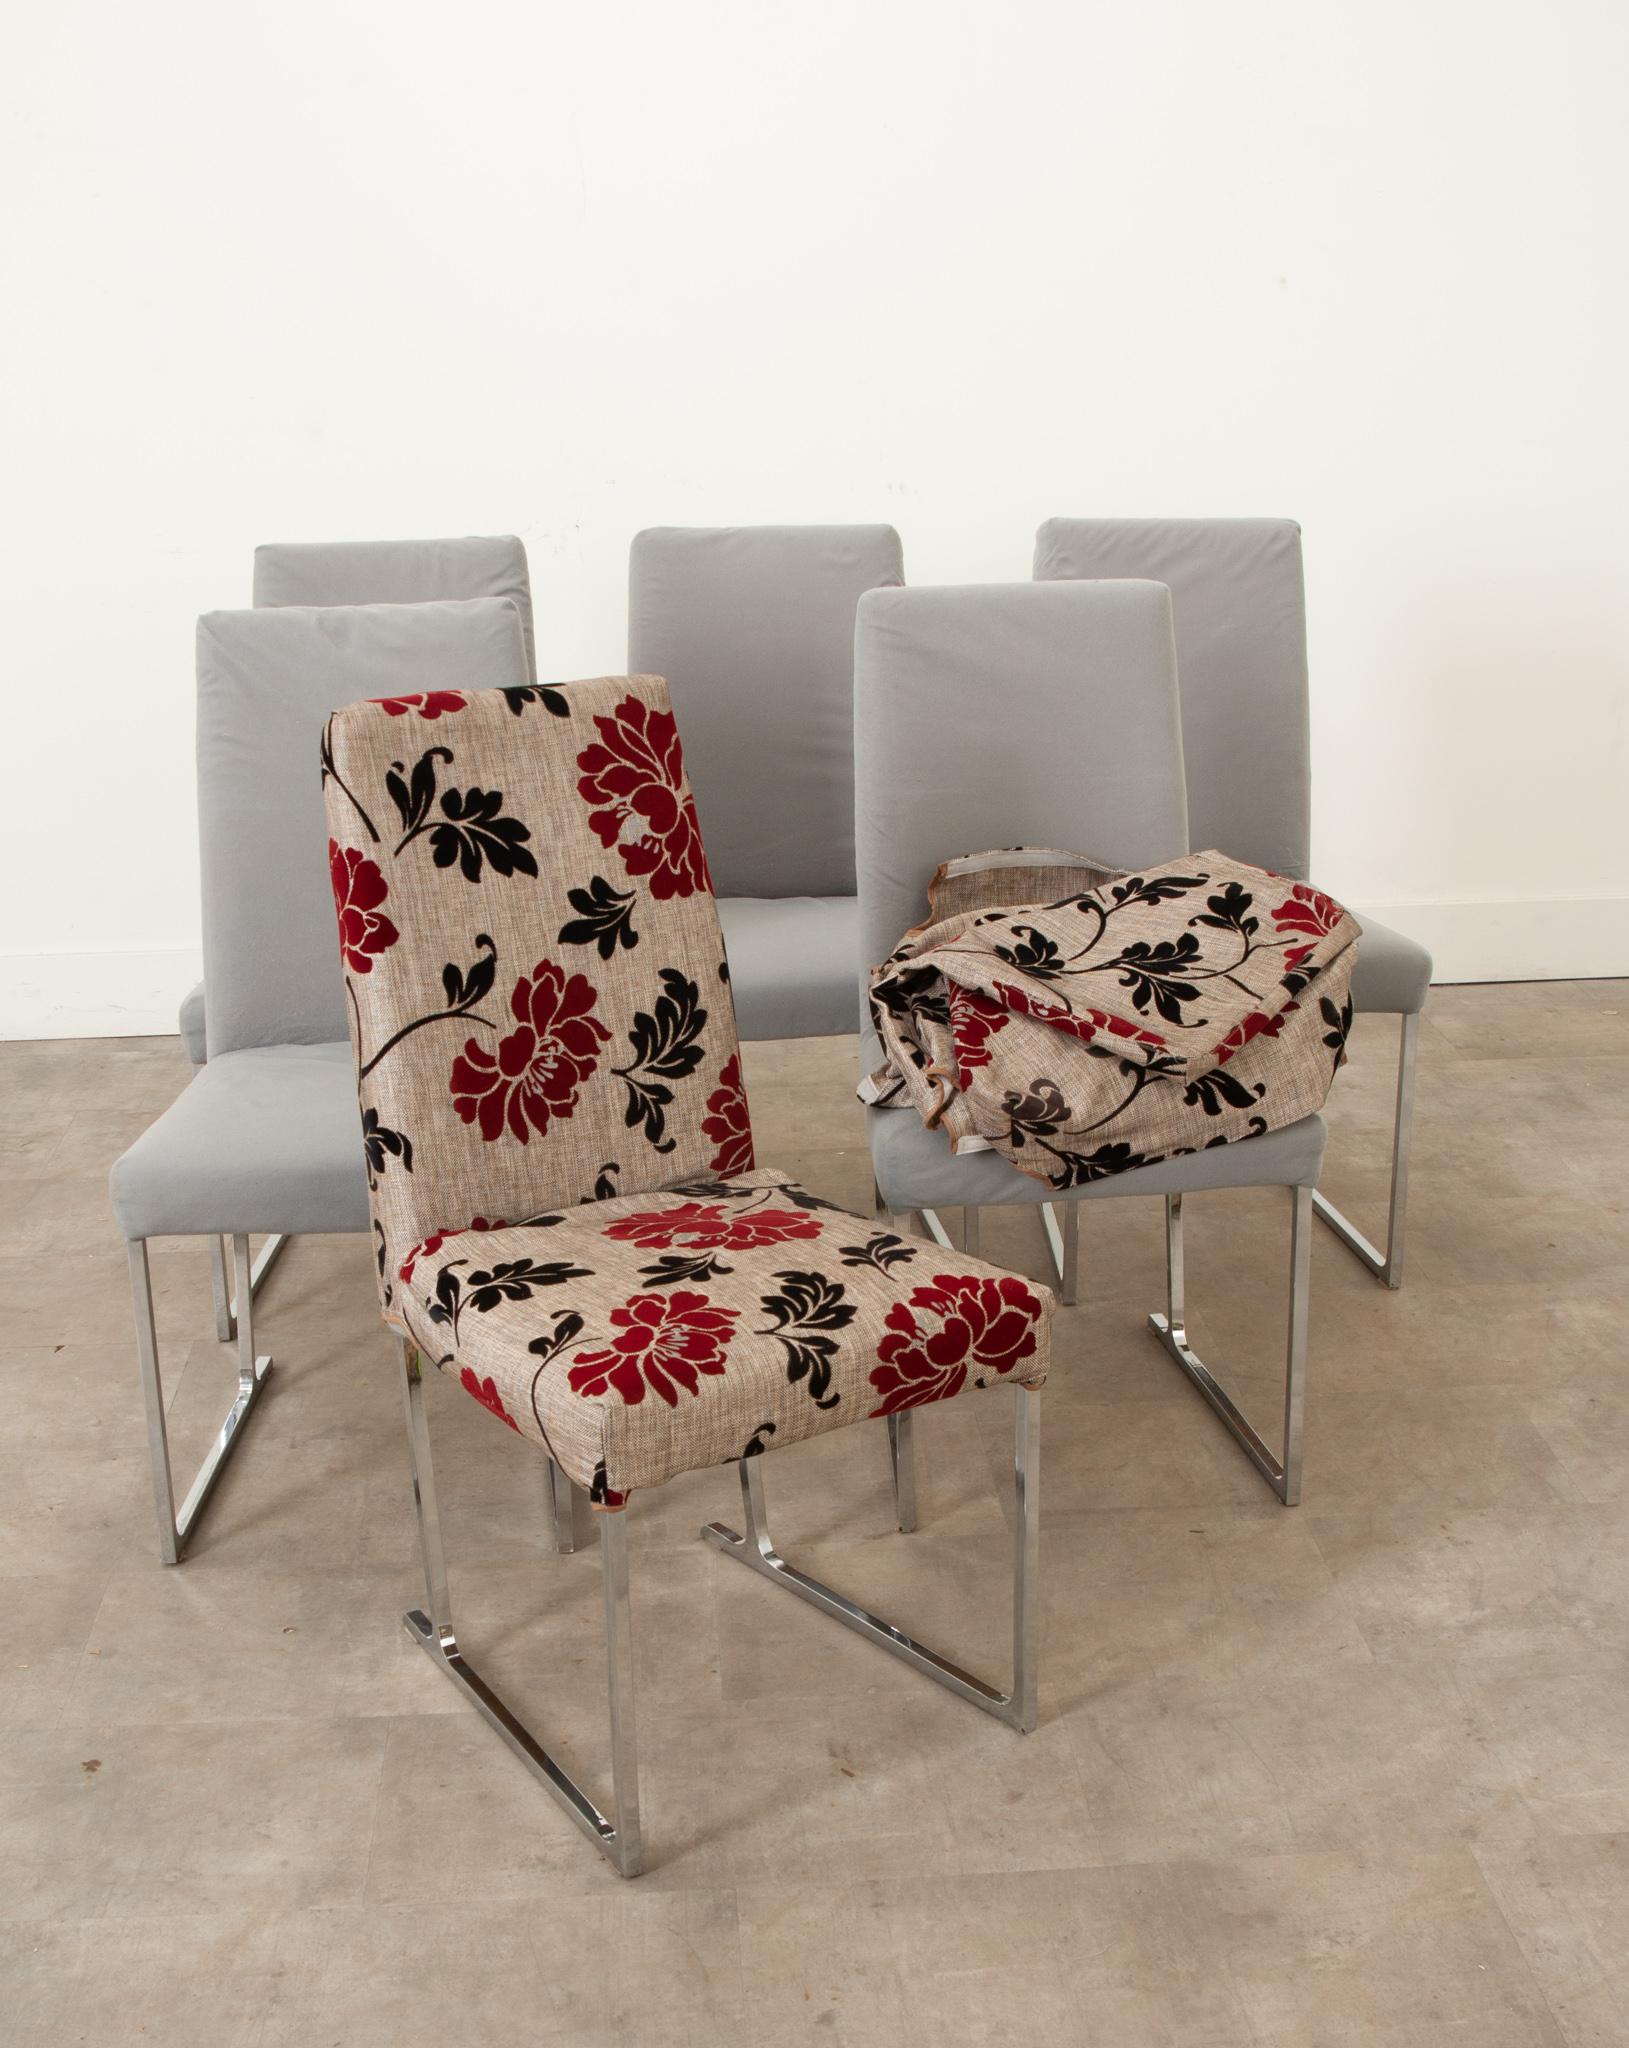 A sleek set of mid-century dining chairs, the chairs sit on chrome legs to give ample stability. These pieces are upholstered with a comfortable felt fabric, and come with slipcovers, adding to the uniqueness of their design. The seat height is 17